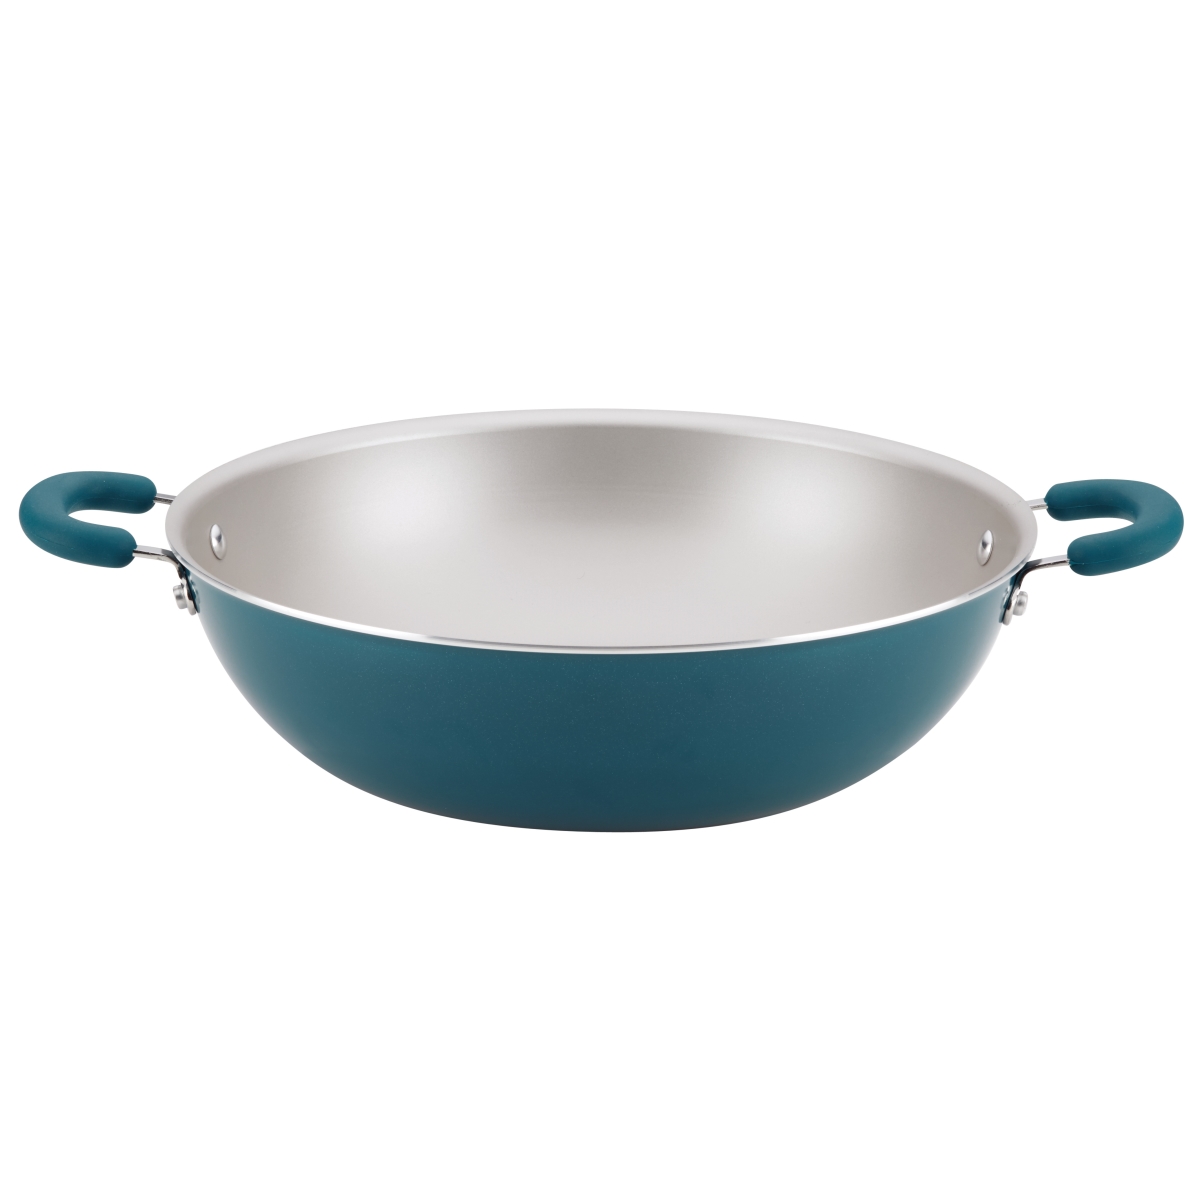 Picture of Rachael Ray 12162 14.25 in. Create Delicious Aluminum Nonstick Wok - Teal Shimmer